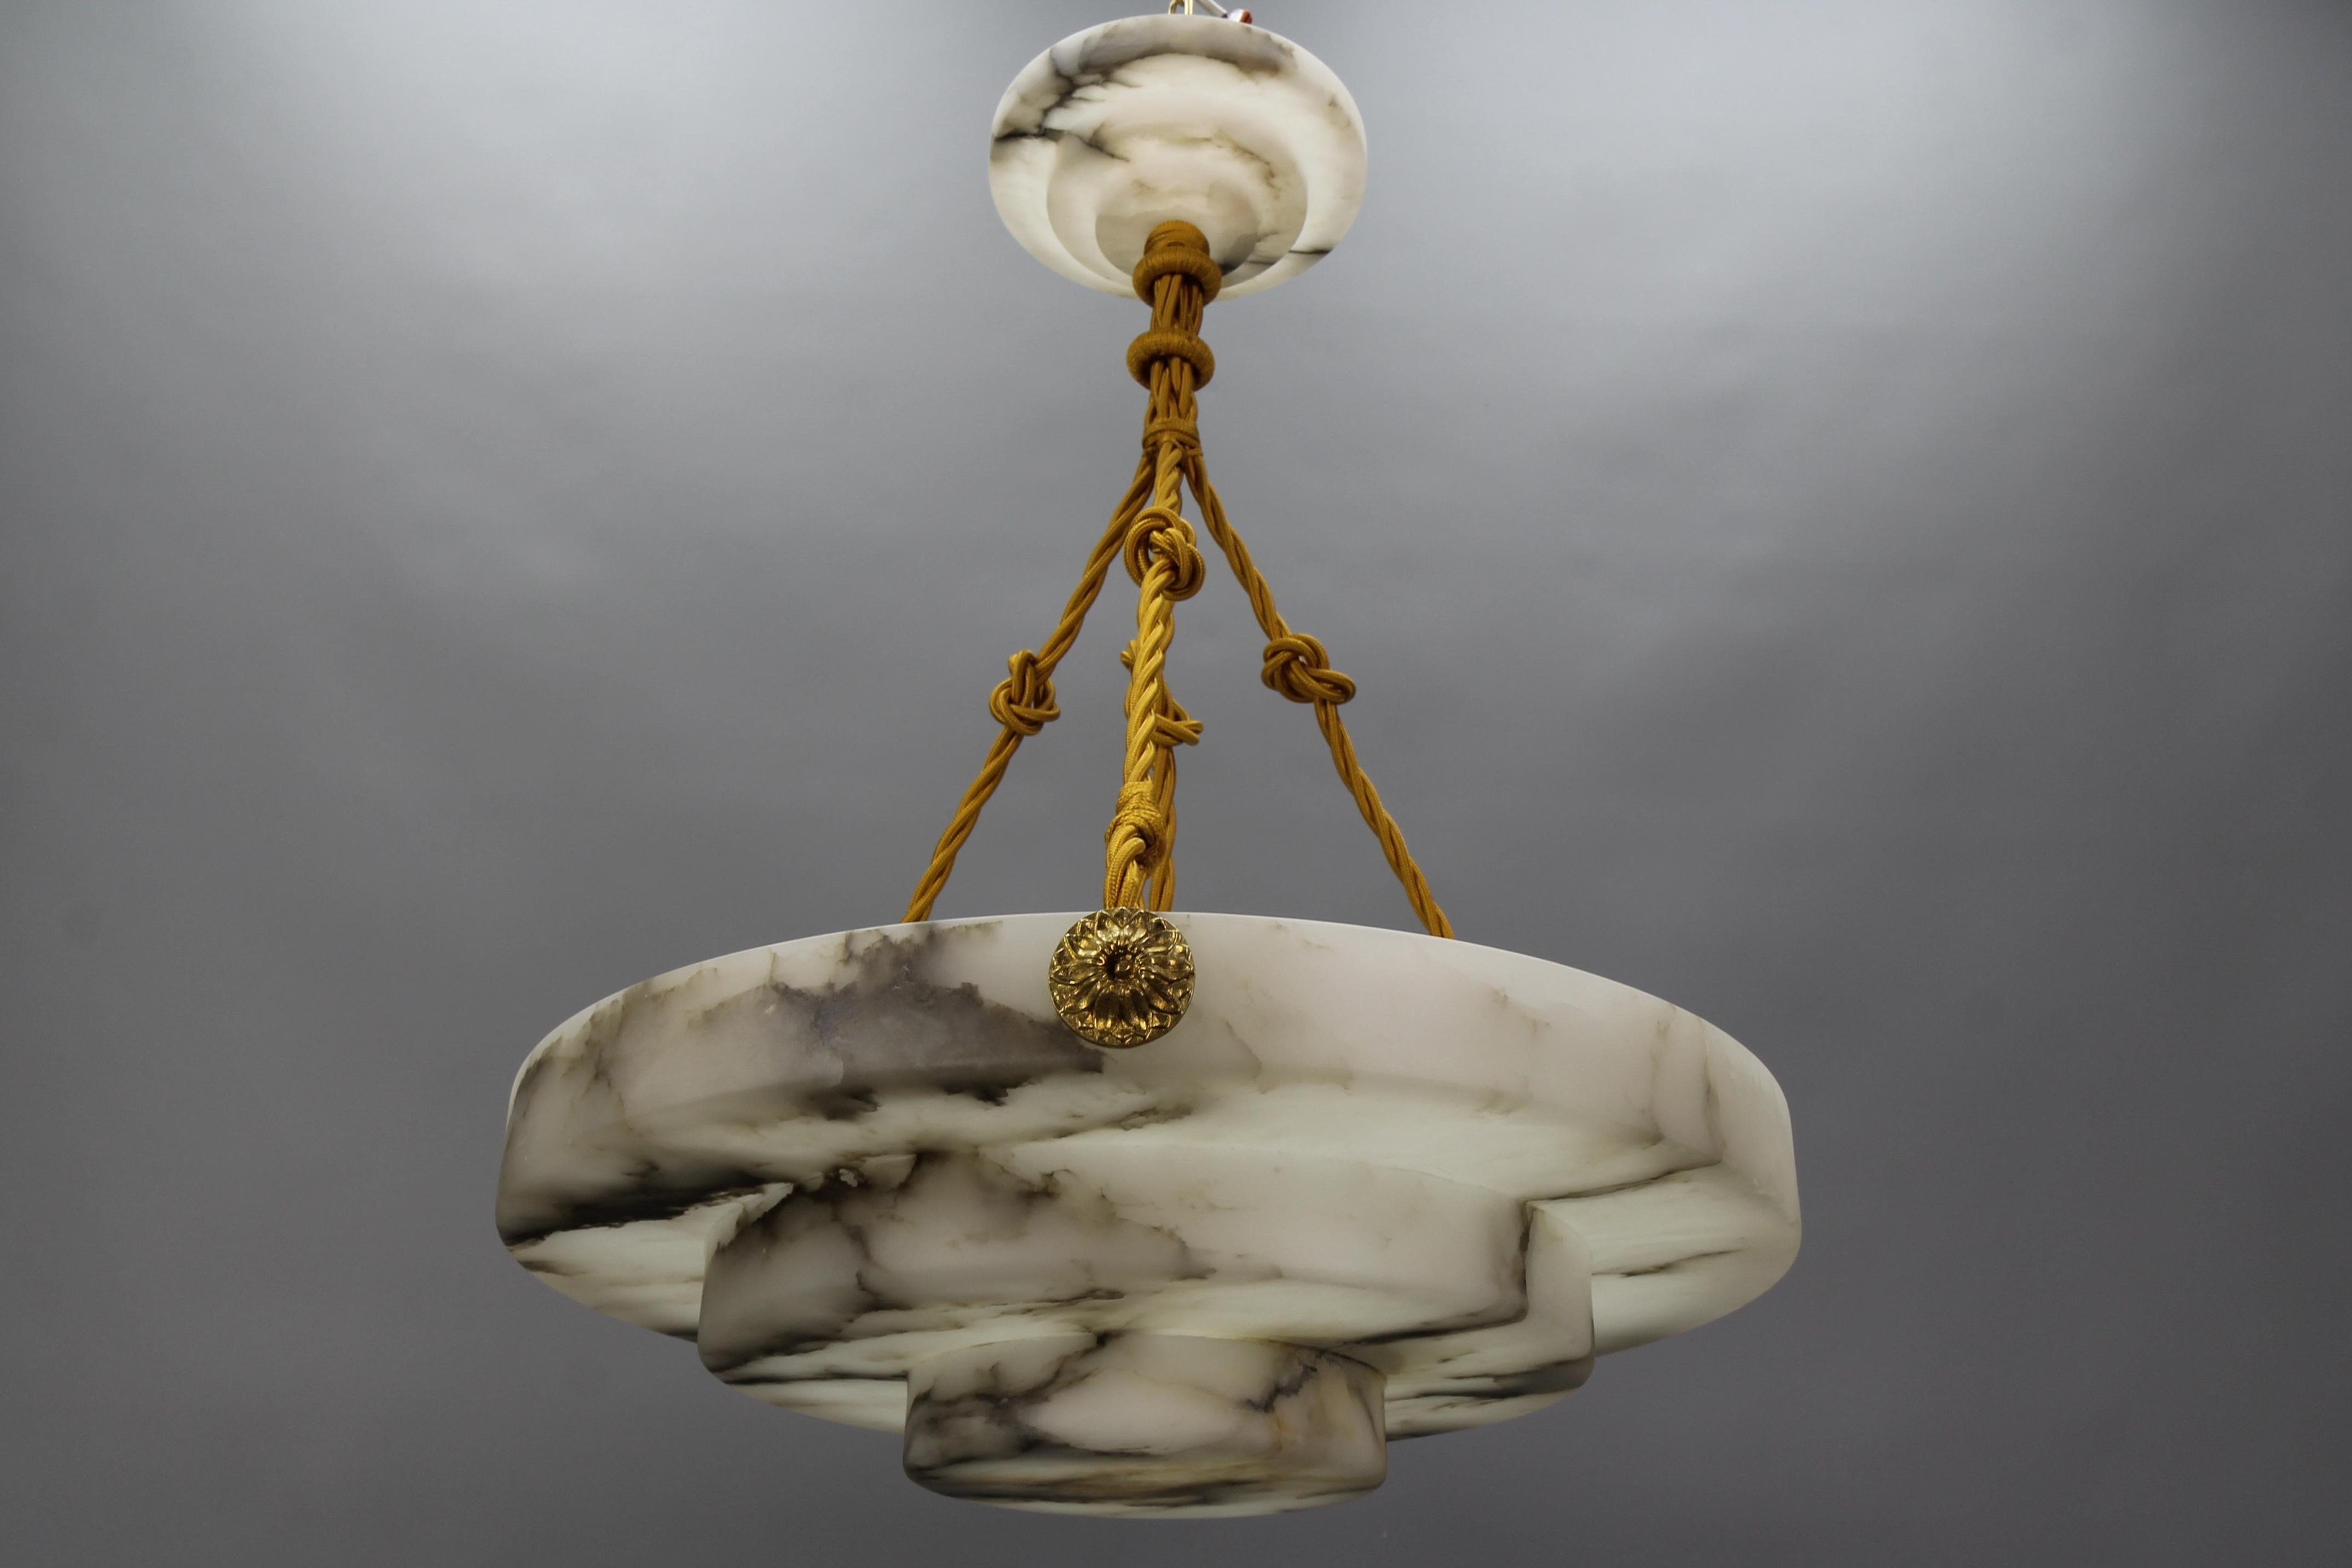 An elegant, round, layered Art Deco ceiling pendant light featuring a lampshade - a bowl - of white alabaster with dark brown and black veins. France, around 1920.
Masterfully carved in layered form, this beautifully veined one-piece alabaster bowl